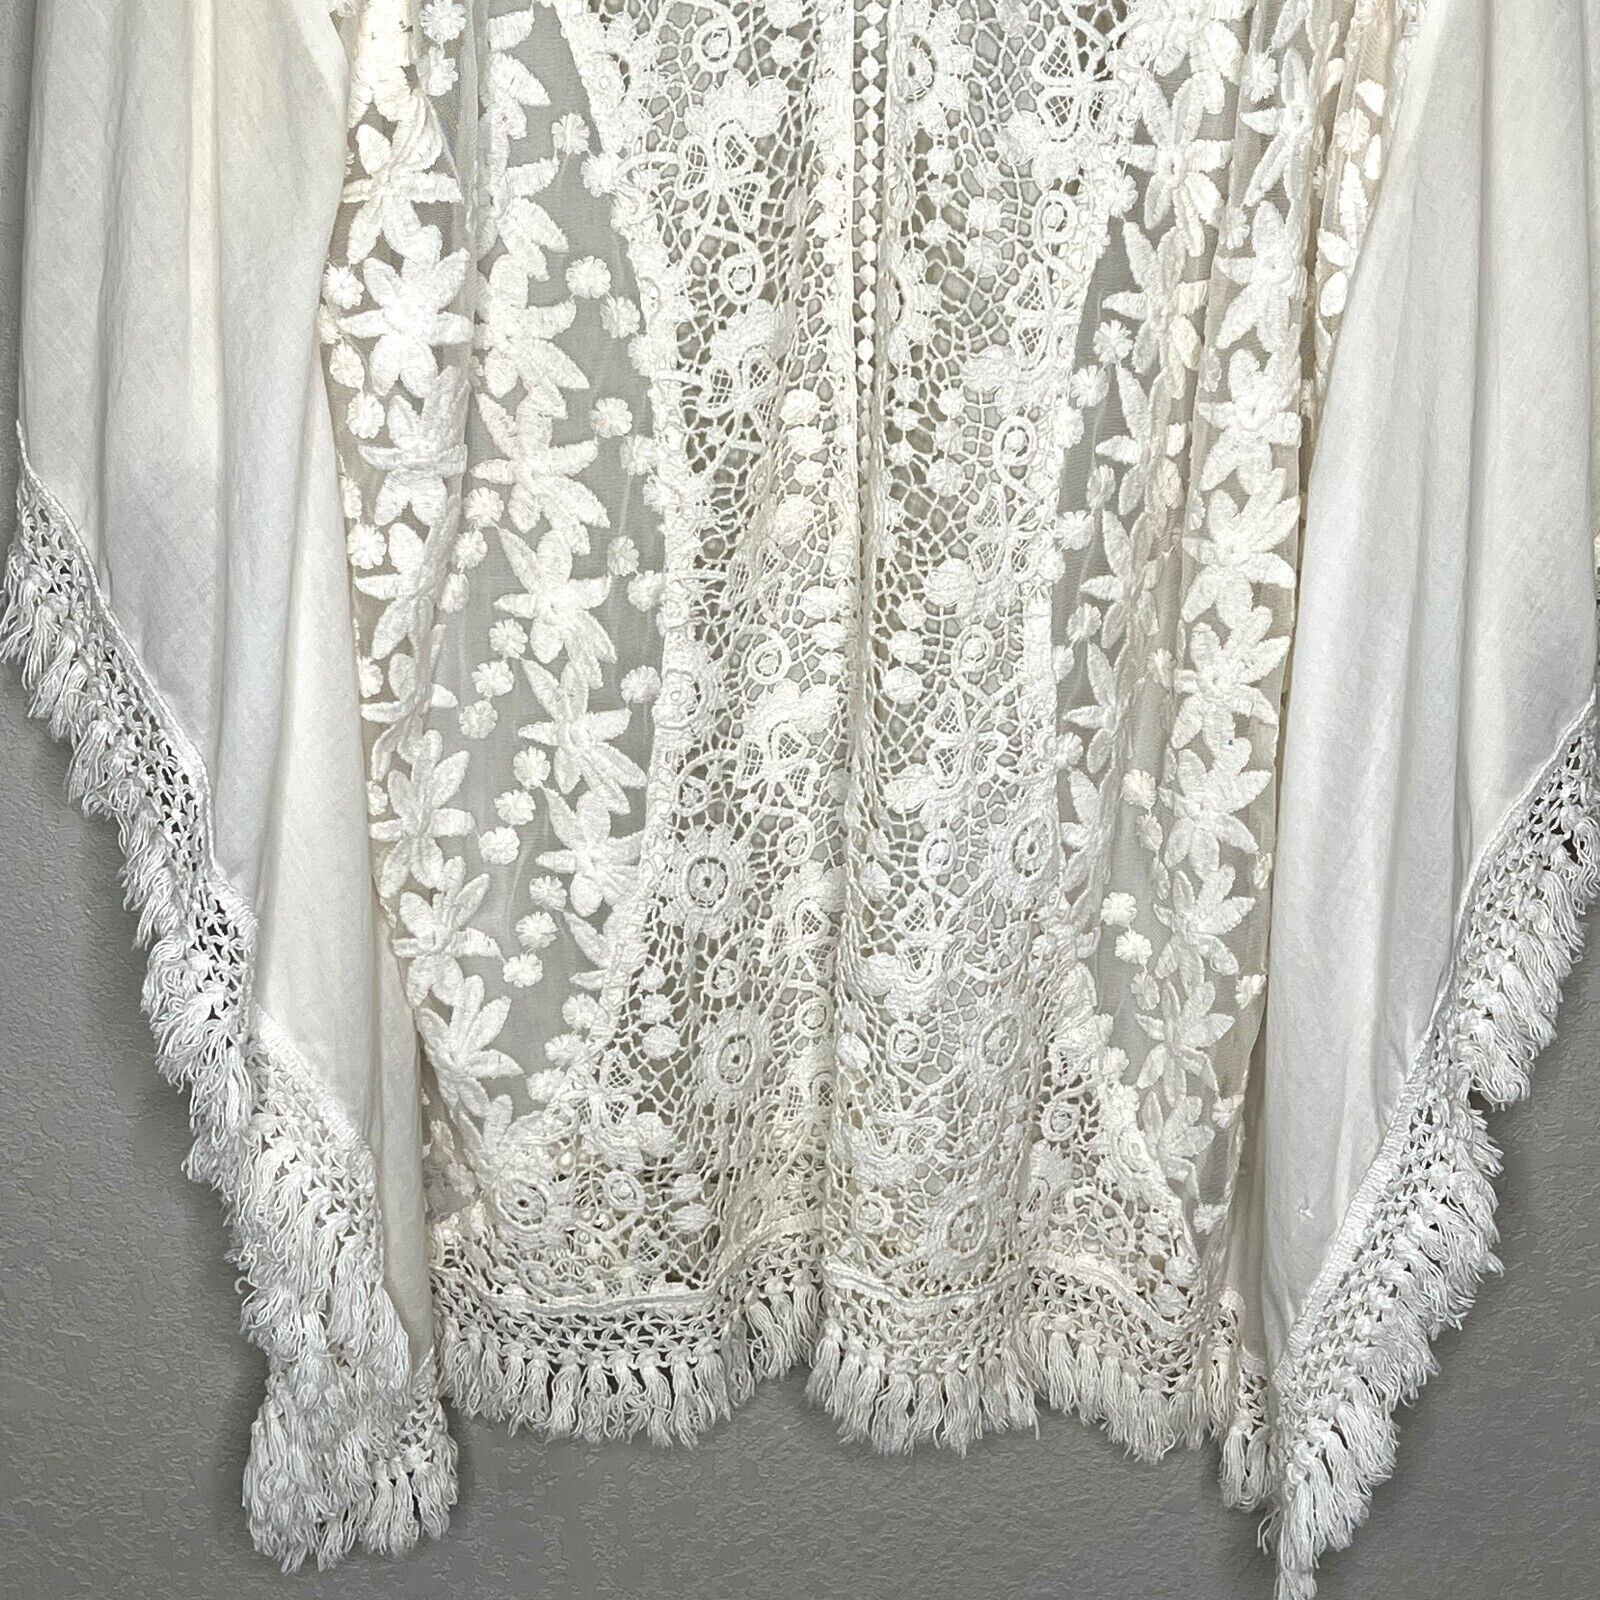 PilyQ Ivory Floral Lace Crochet Sheer Tassel Swim Cover Up Size XS/S